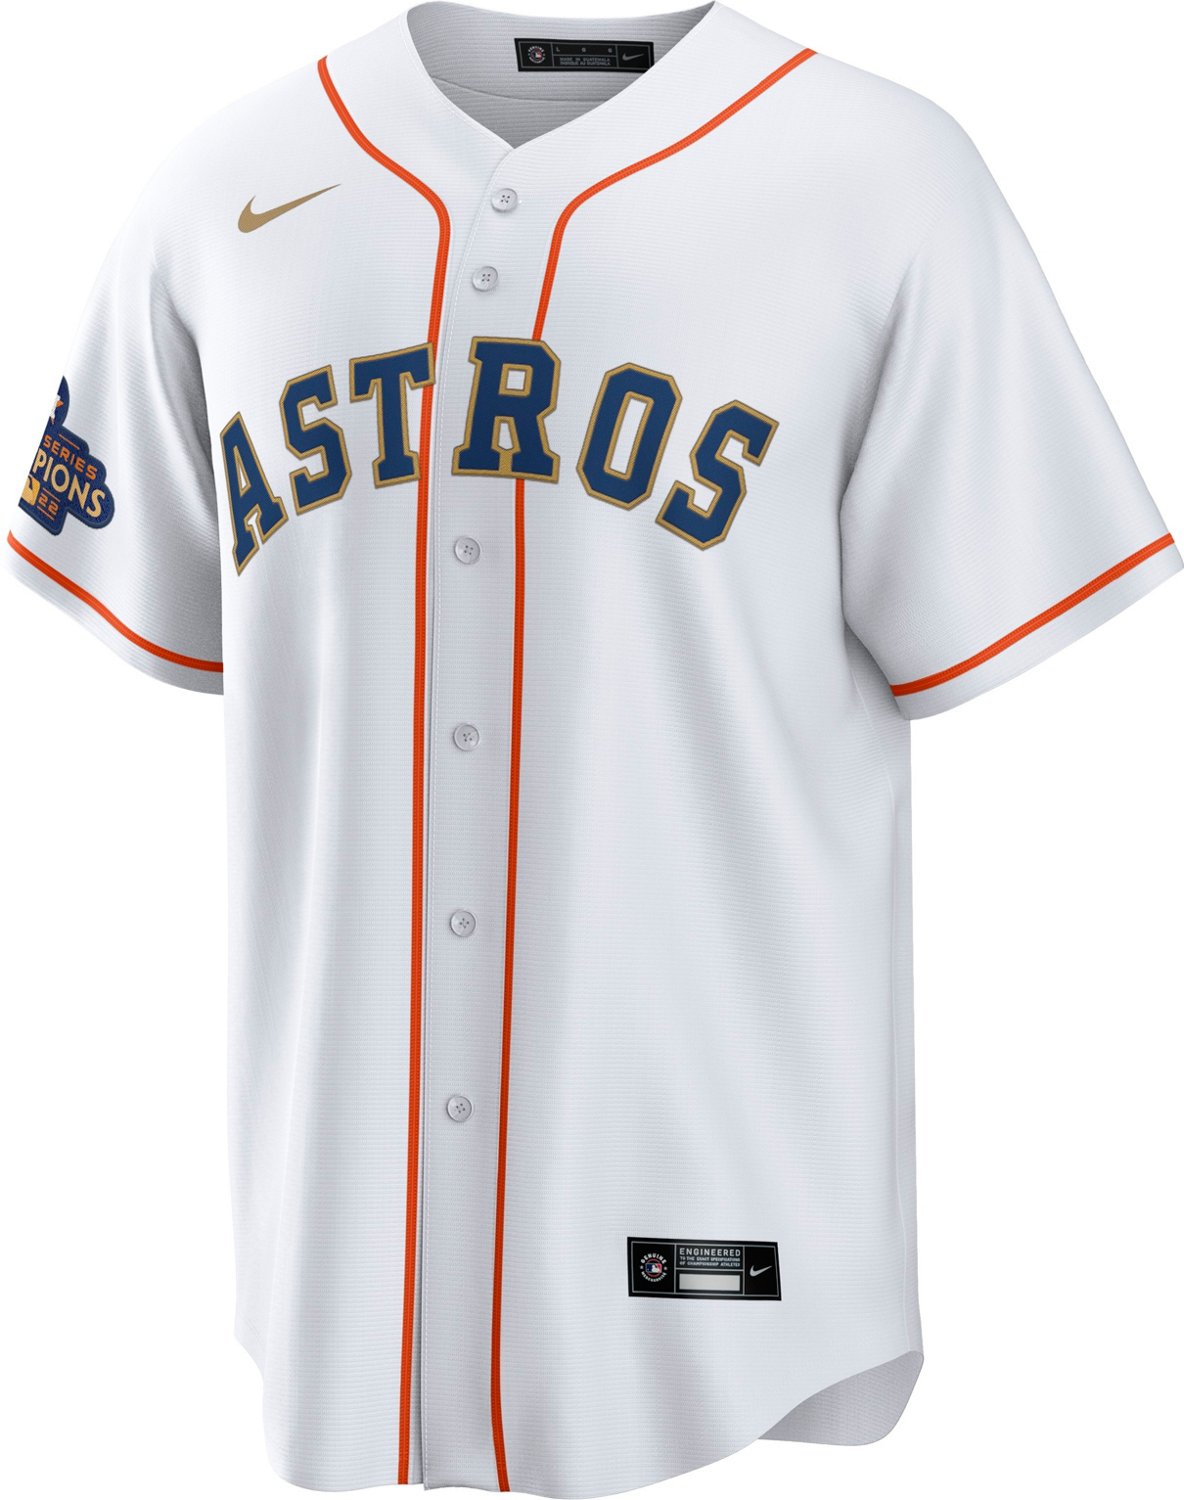 gold astros jersey